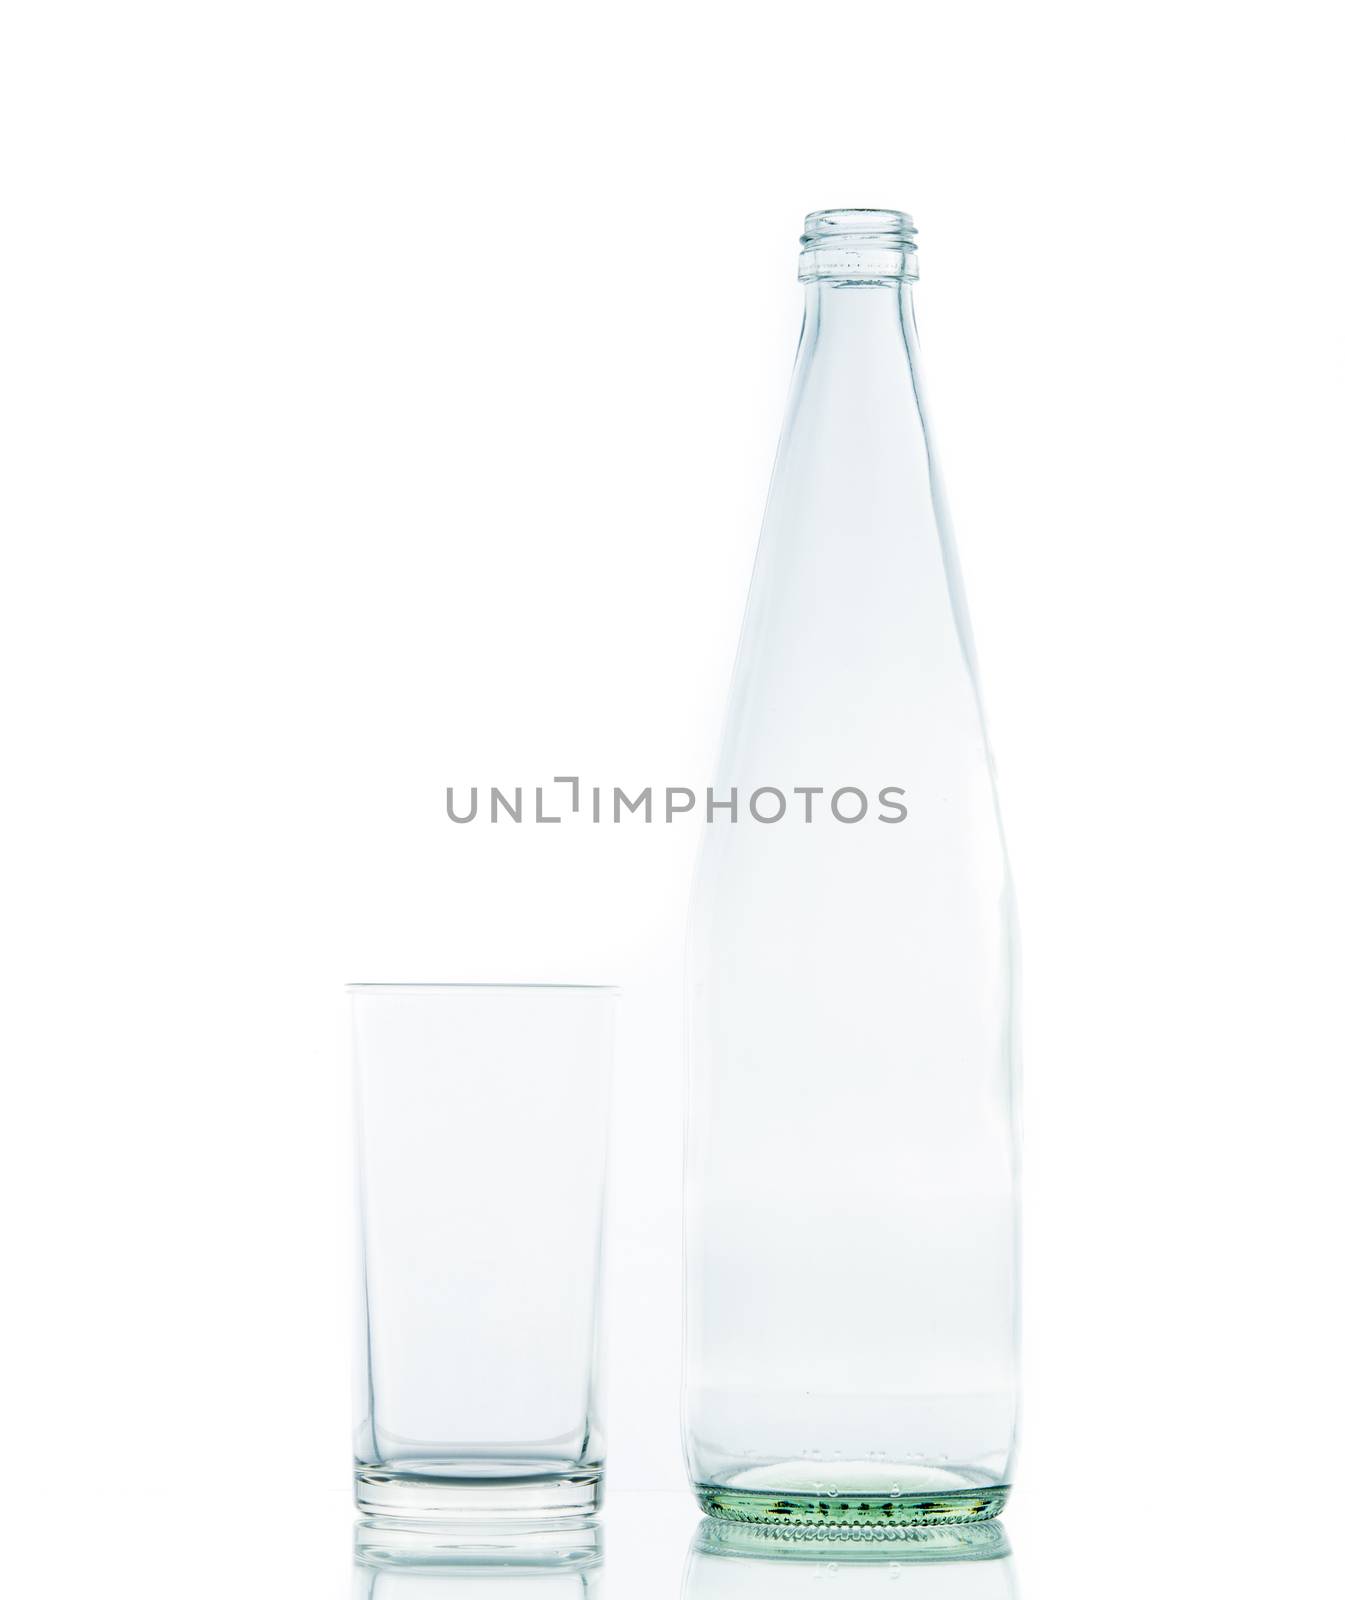 Bottle and Glass water clear isolate on over white background